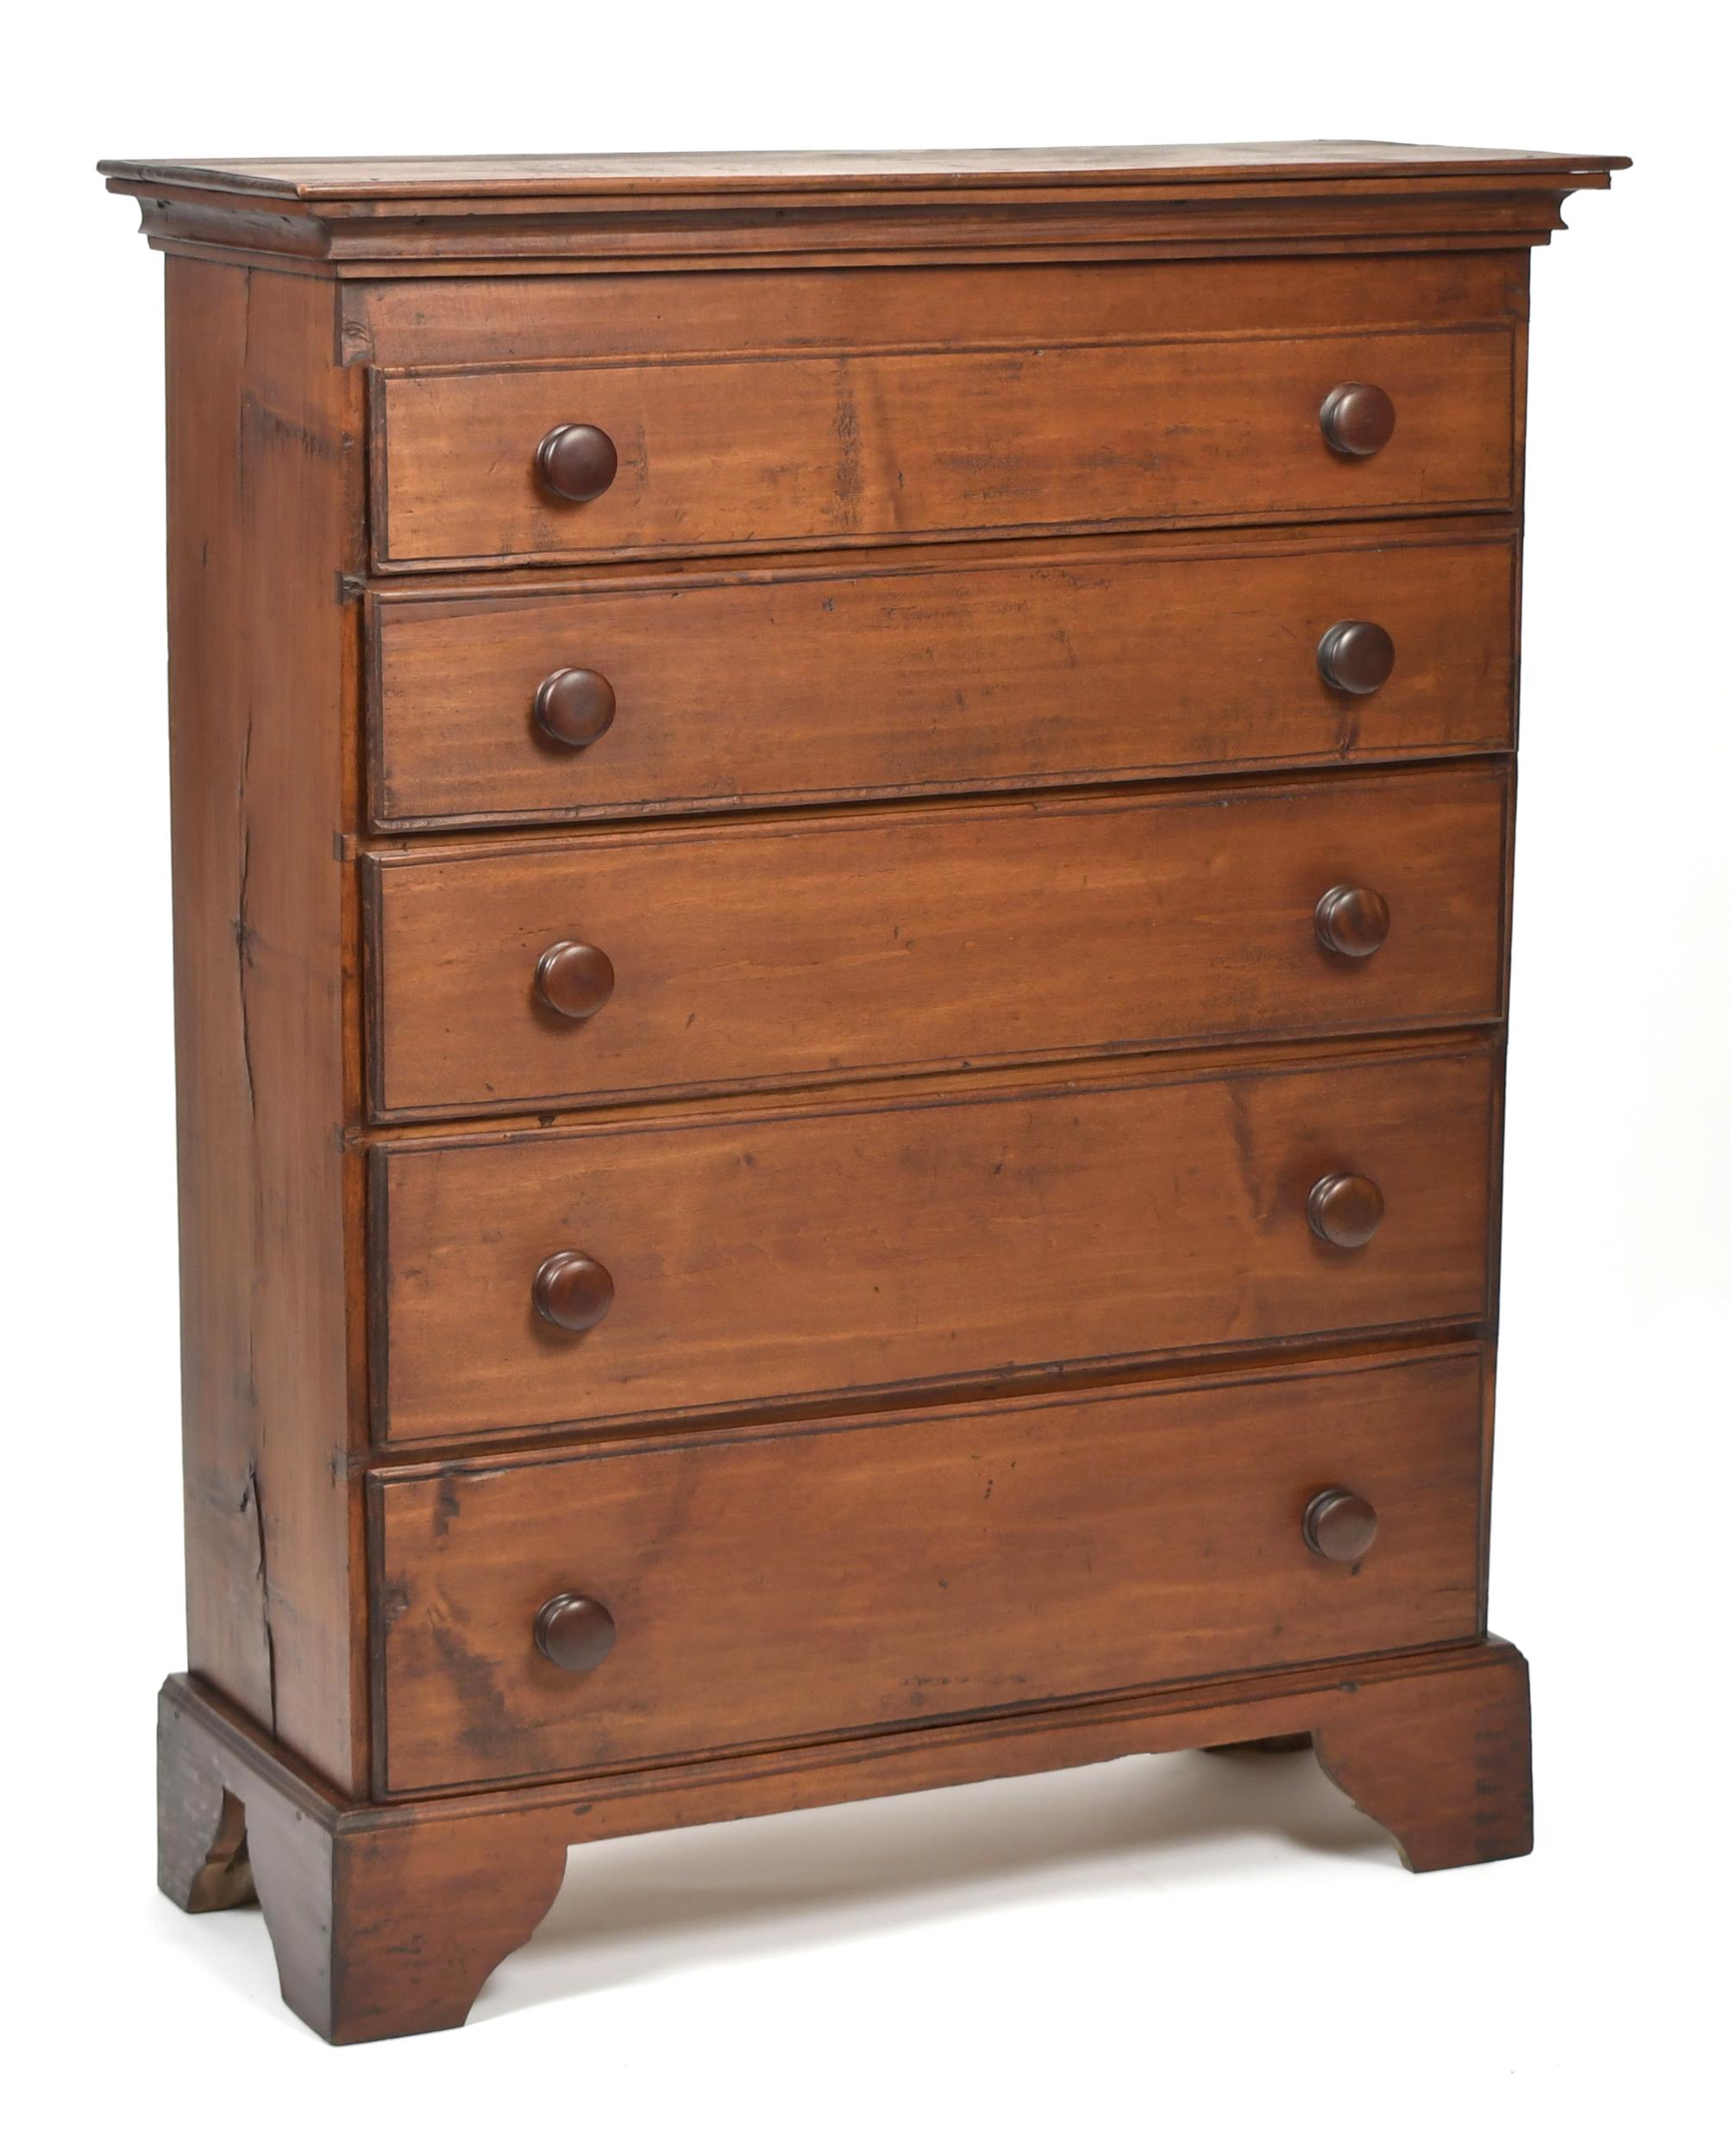 18TH C. COUNTRY CHIPPENDALE TALL